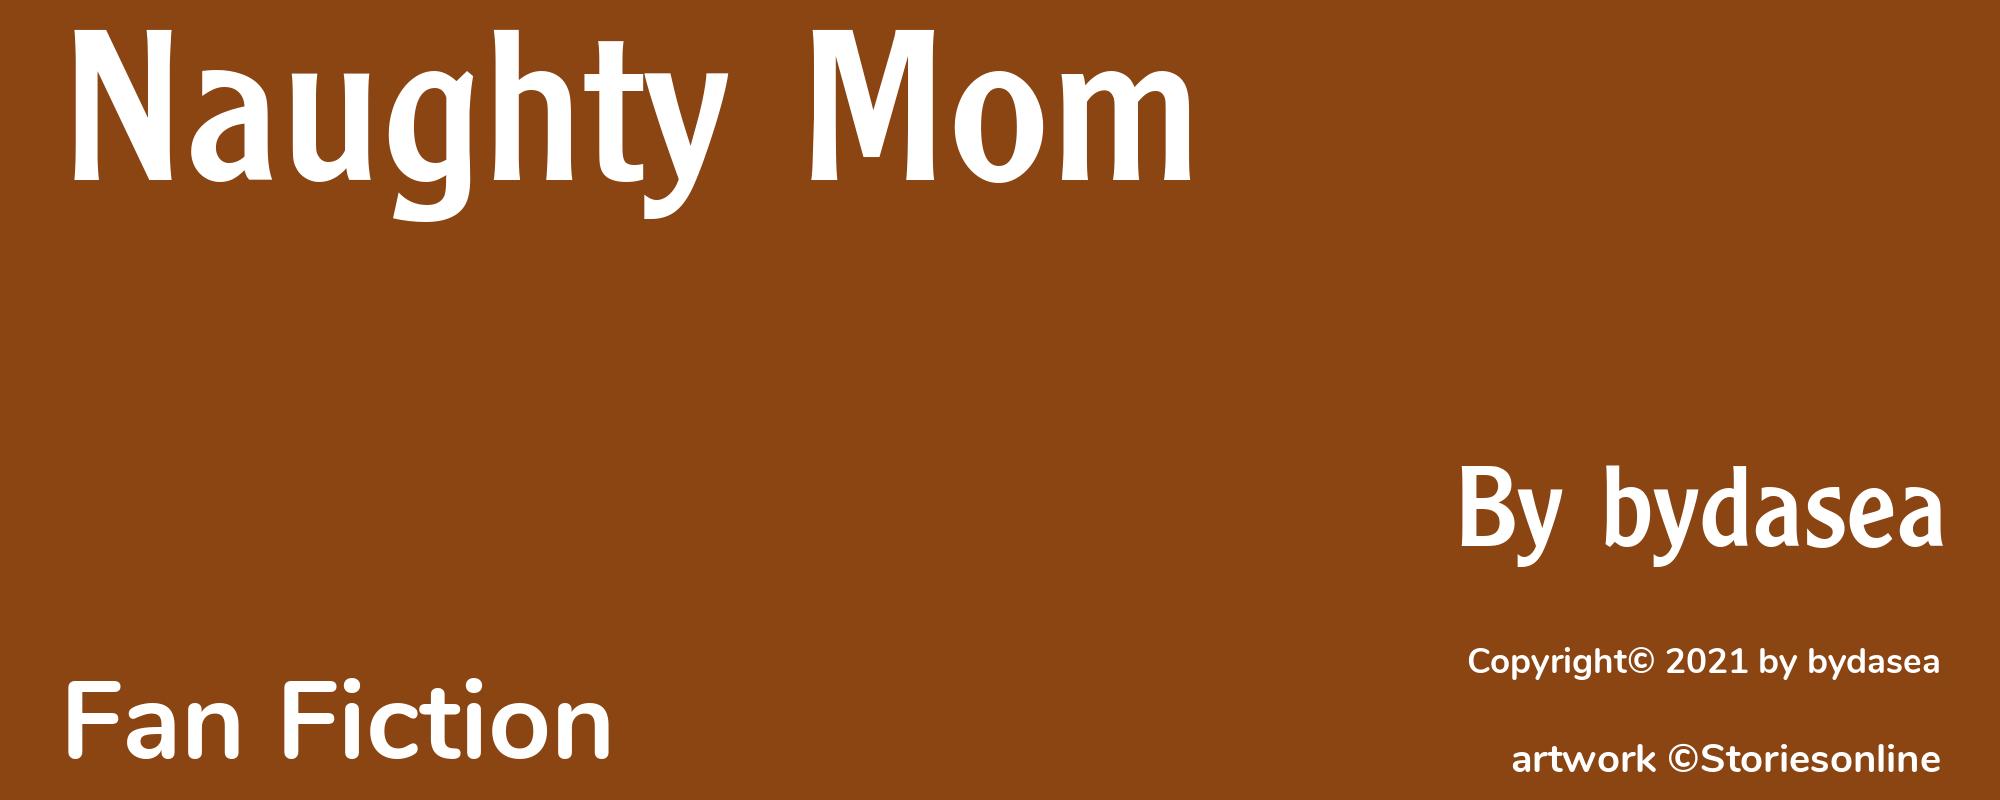 Naughty Mom - Cover